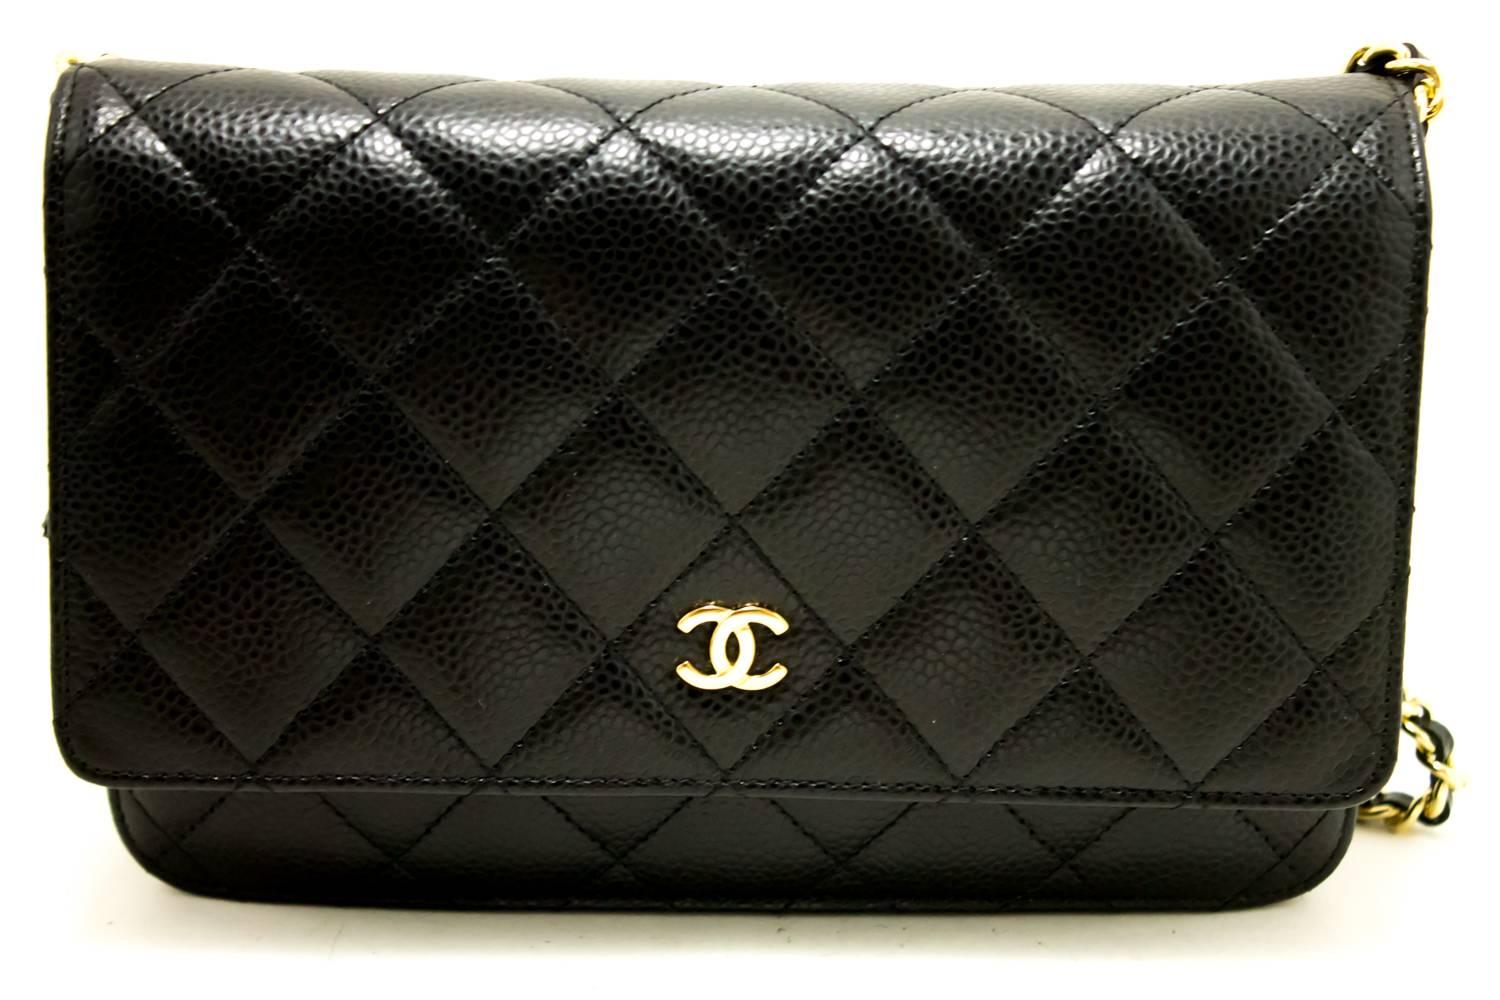 An authentic CHANEL Caviar Wallet On Chain WOC Black Shoulder Bag Crossbody The outside material is Caviar leather.
Conditions & Ratings
Outside material: Caviar leather
Color: Black
Closure: Snap
Hardware and chain: Gold-tone
Made in France
Serial